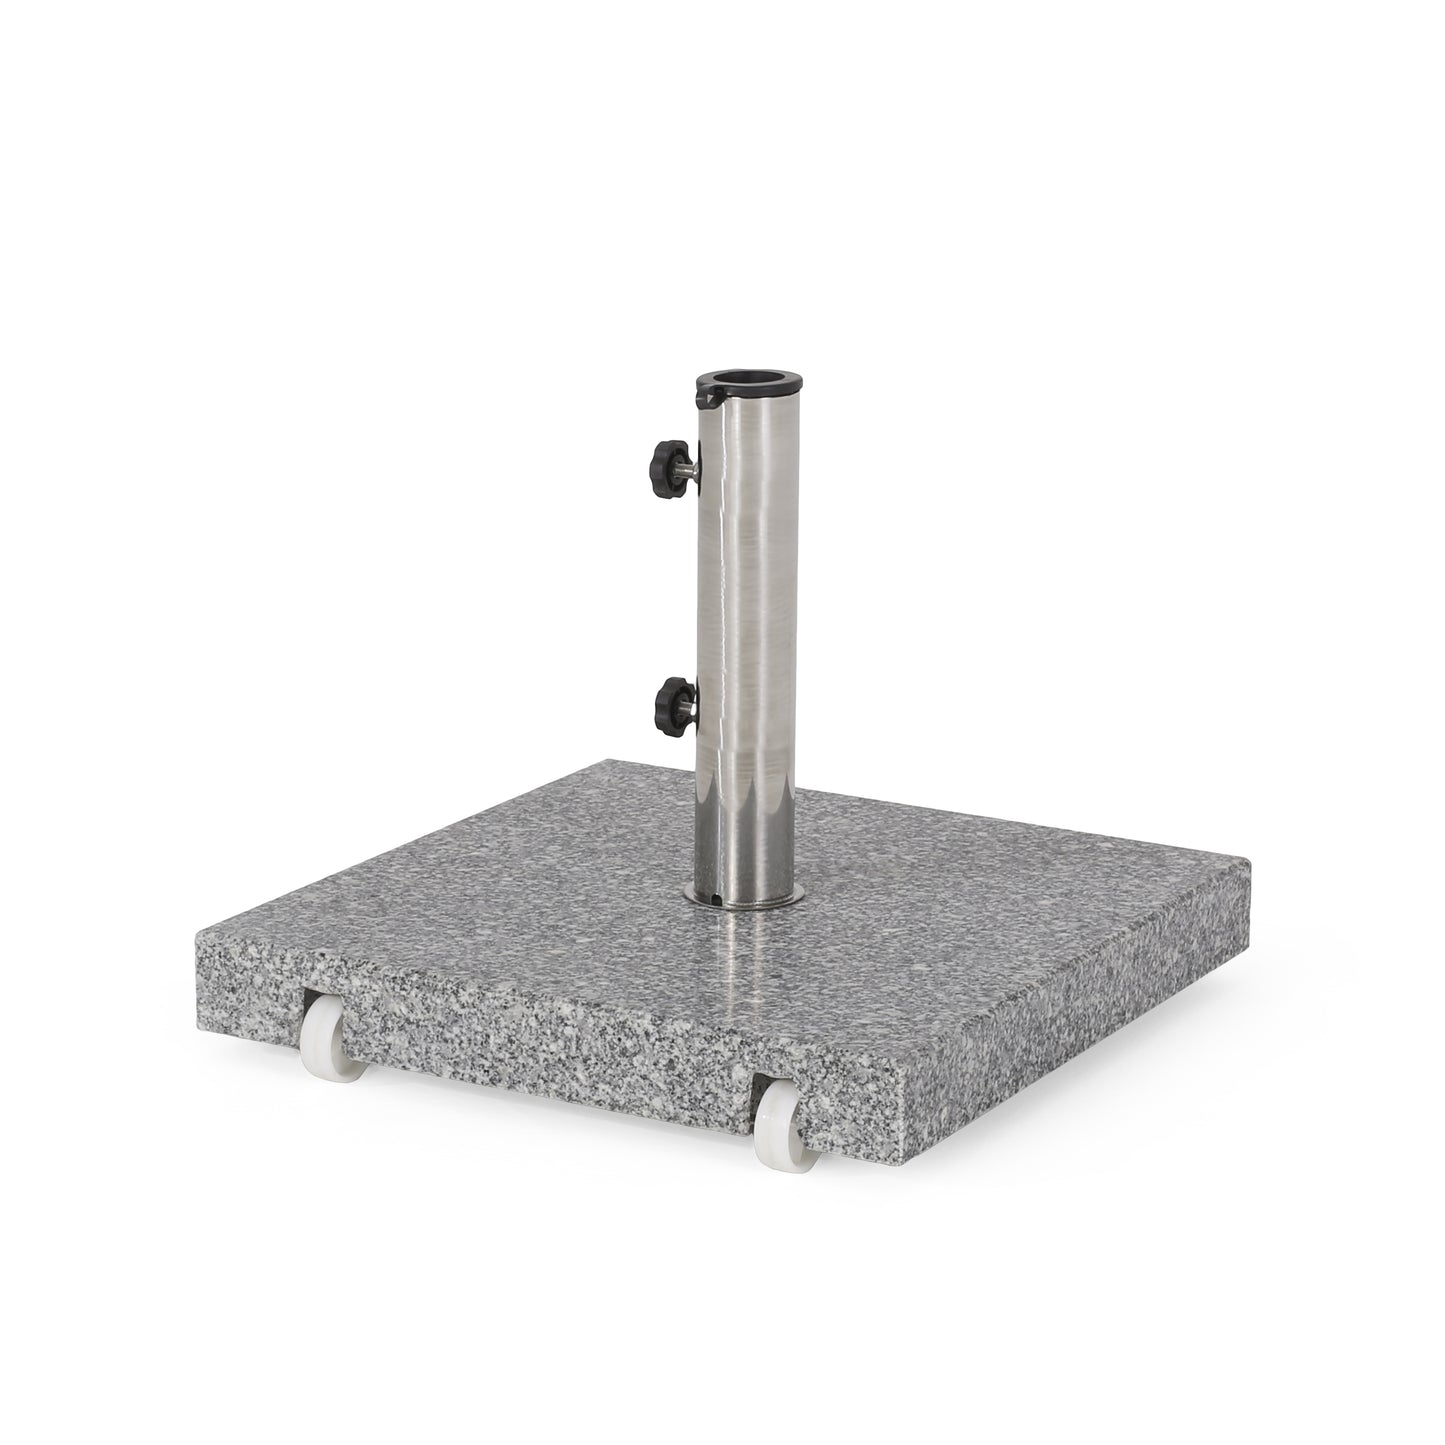 Martino Outdoor Natural Grey Granite and Stainless Steel Umbrella Base